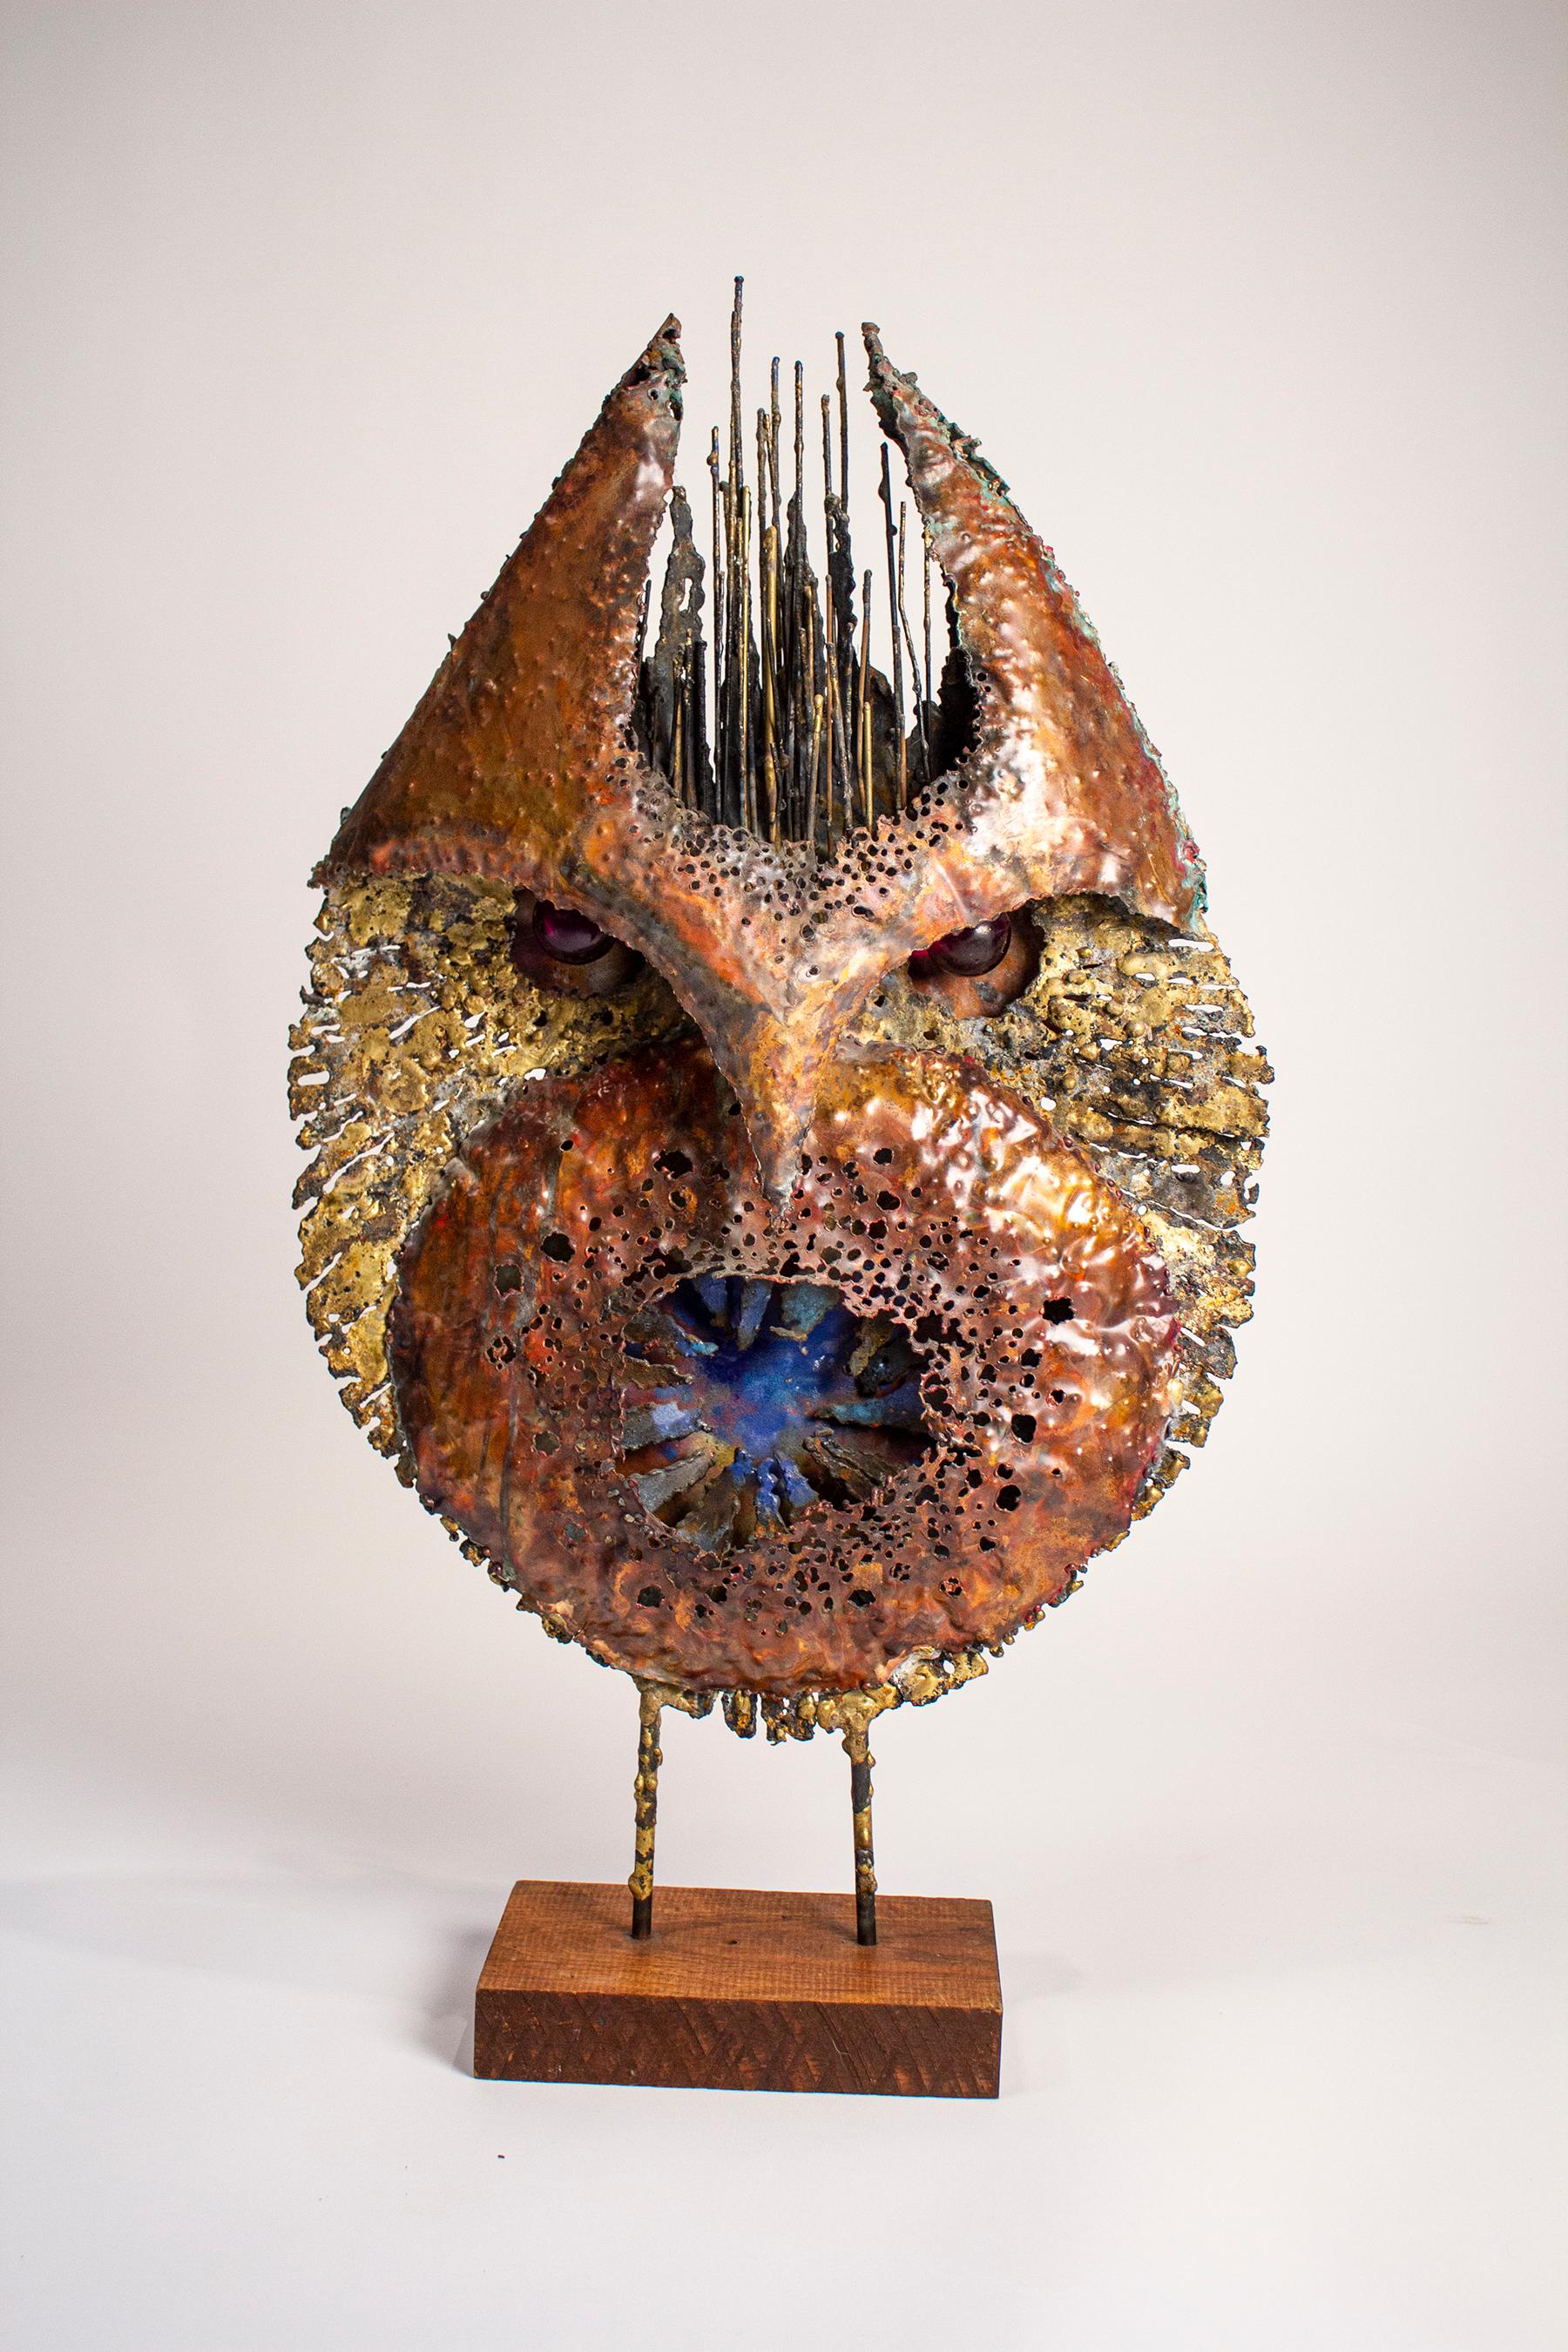 Amazing large scale brutalist owl sculpture with glass eyes and beautiful enamel coloration by renowned Iowa abstract artist James Anthony Bearden from his Animal Series. We also have the smaller Owl pictured available in a separate listing. We have